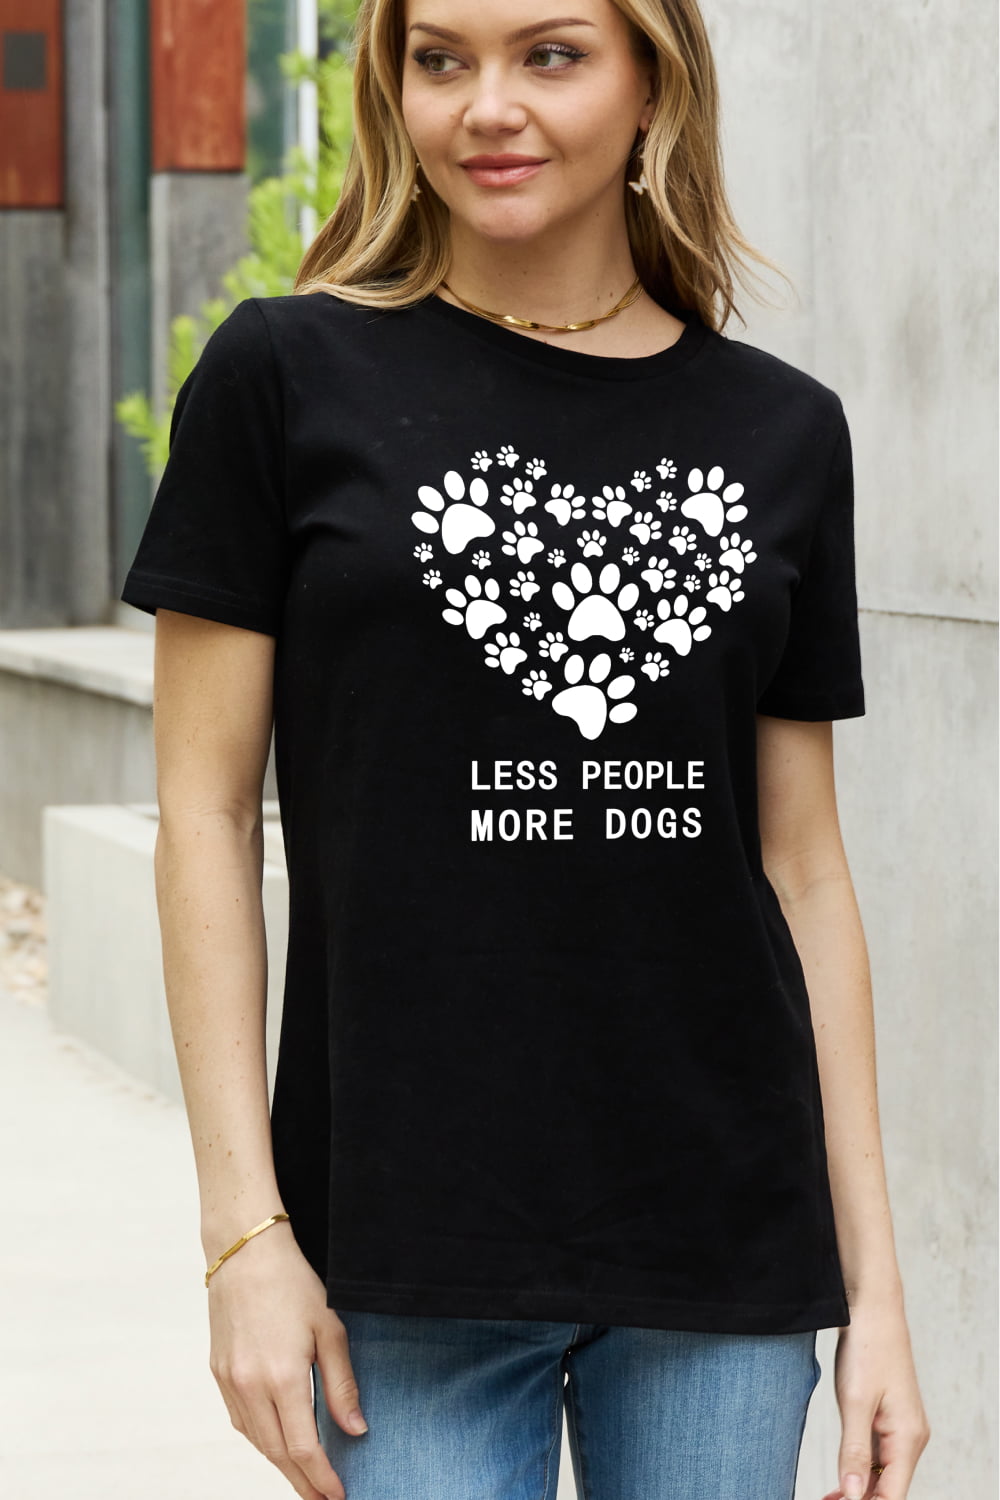 Simply Love Simply Love Full Size LESS PEOPLE MORE DOGS Heart Graphic Cotton Tee